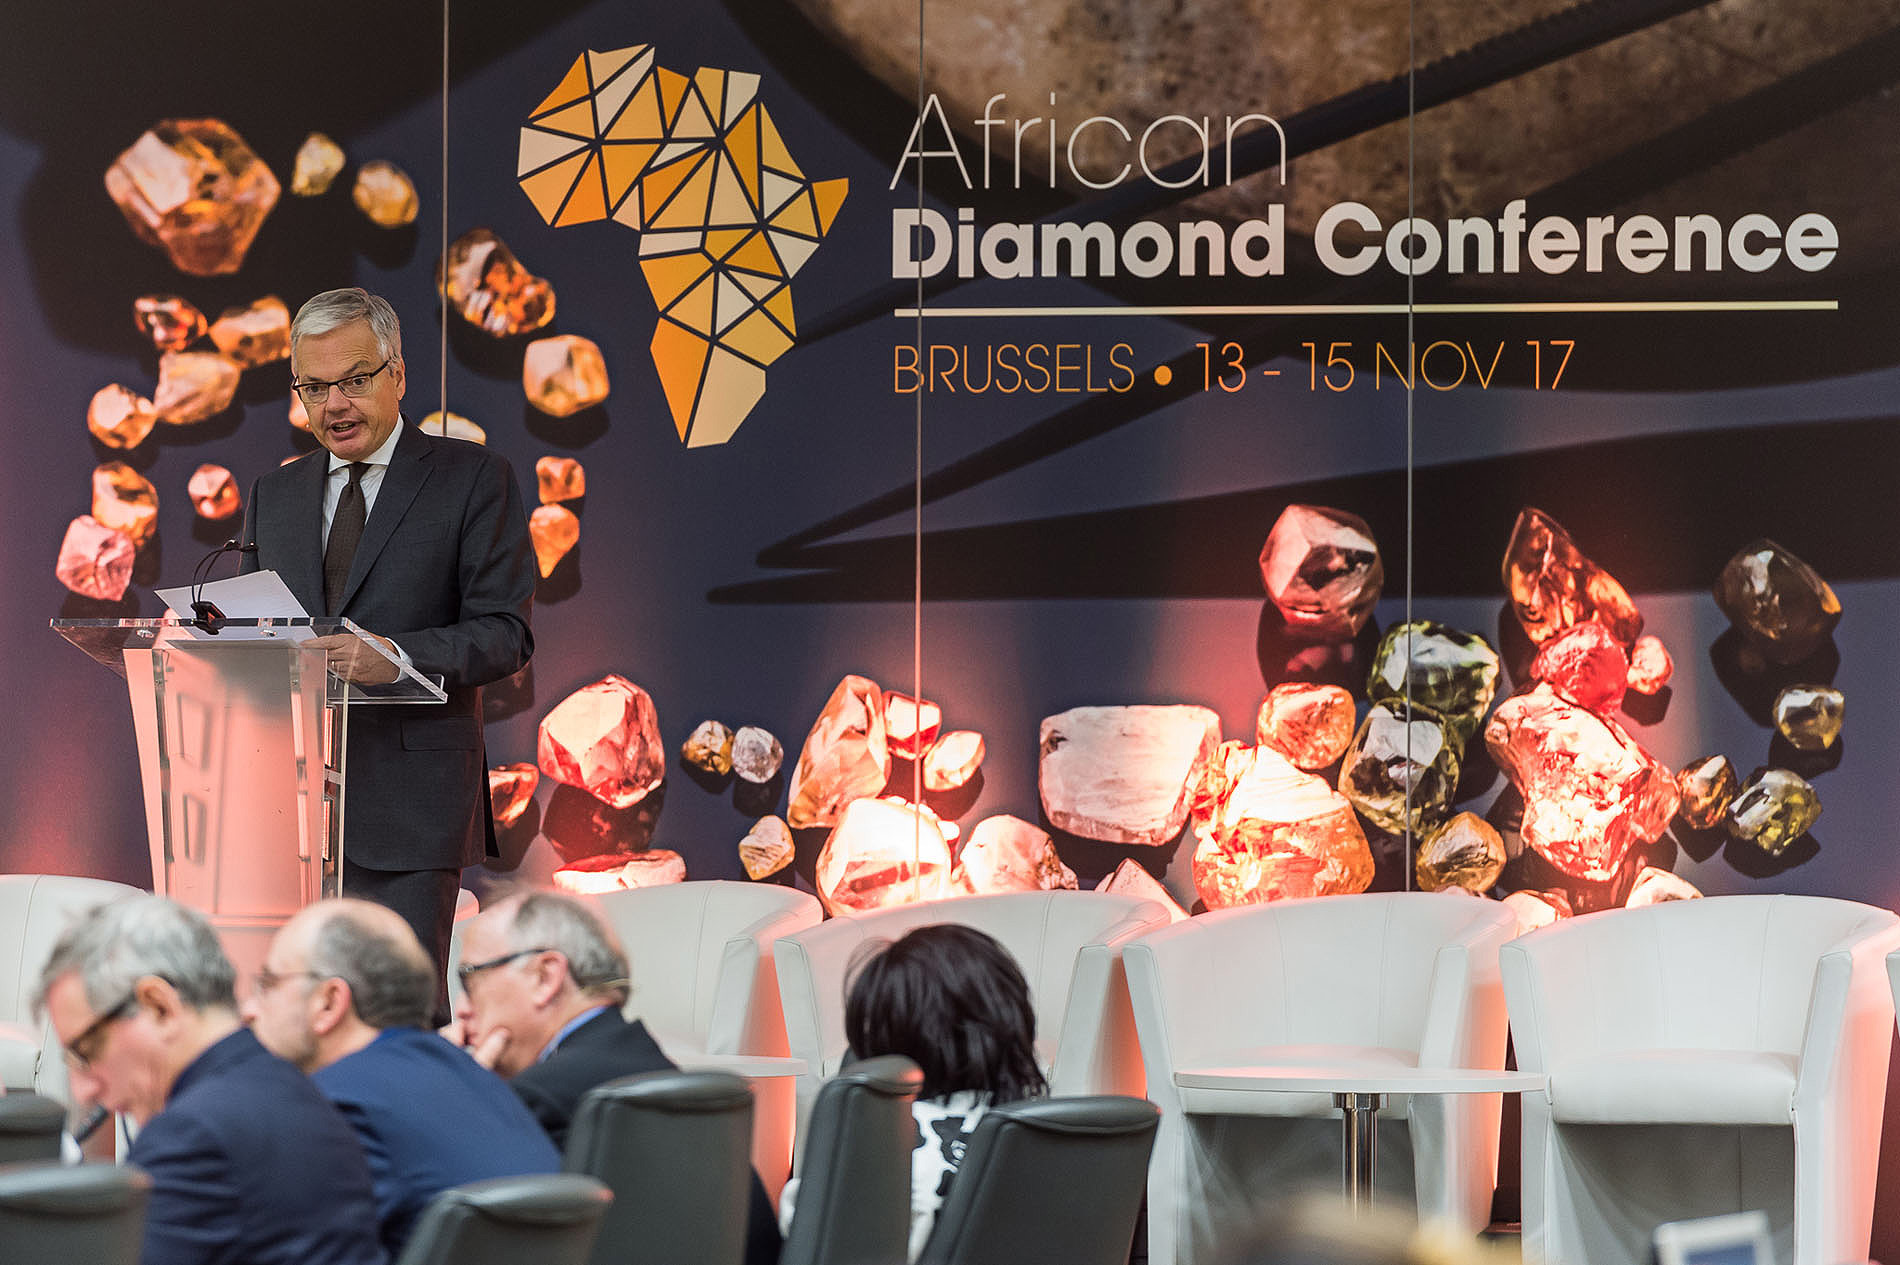 The 2017 African Diamond Conference organized by the Antwerp Diamond World Centre [ADWC]